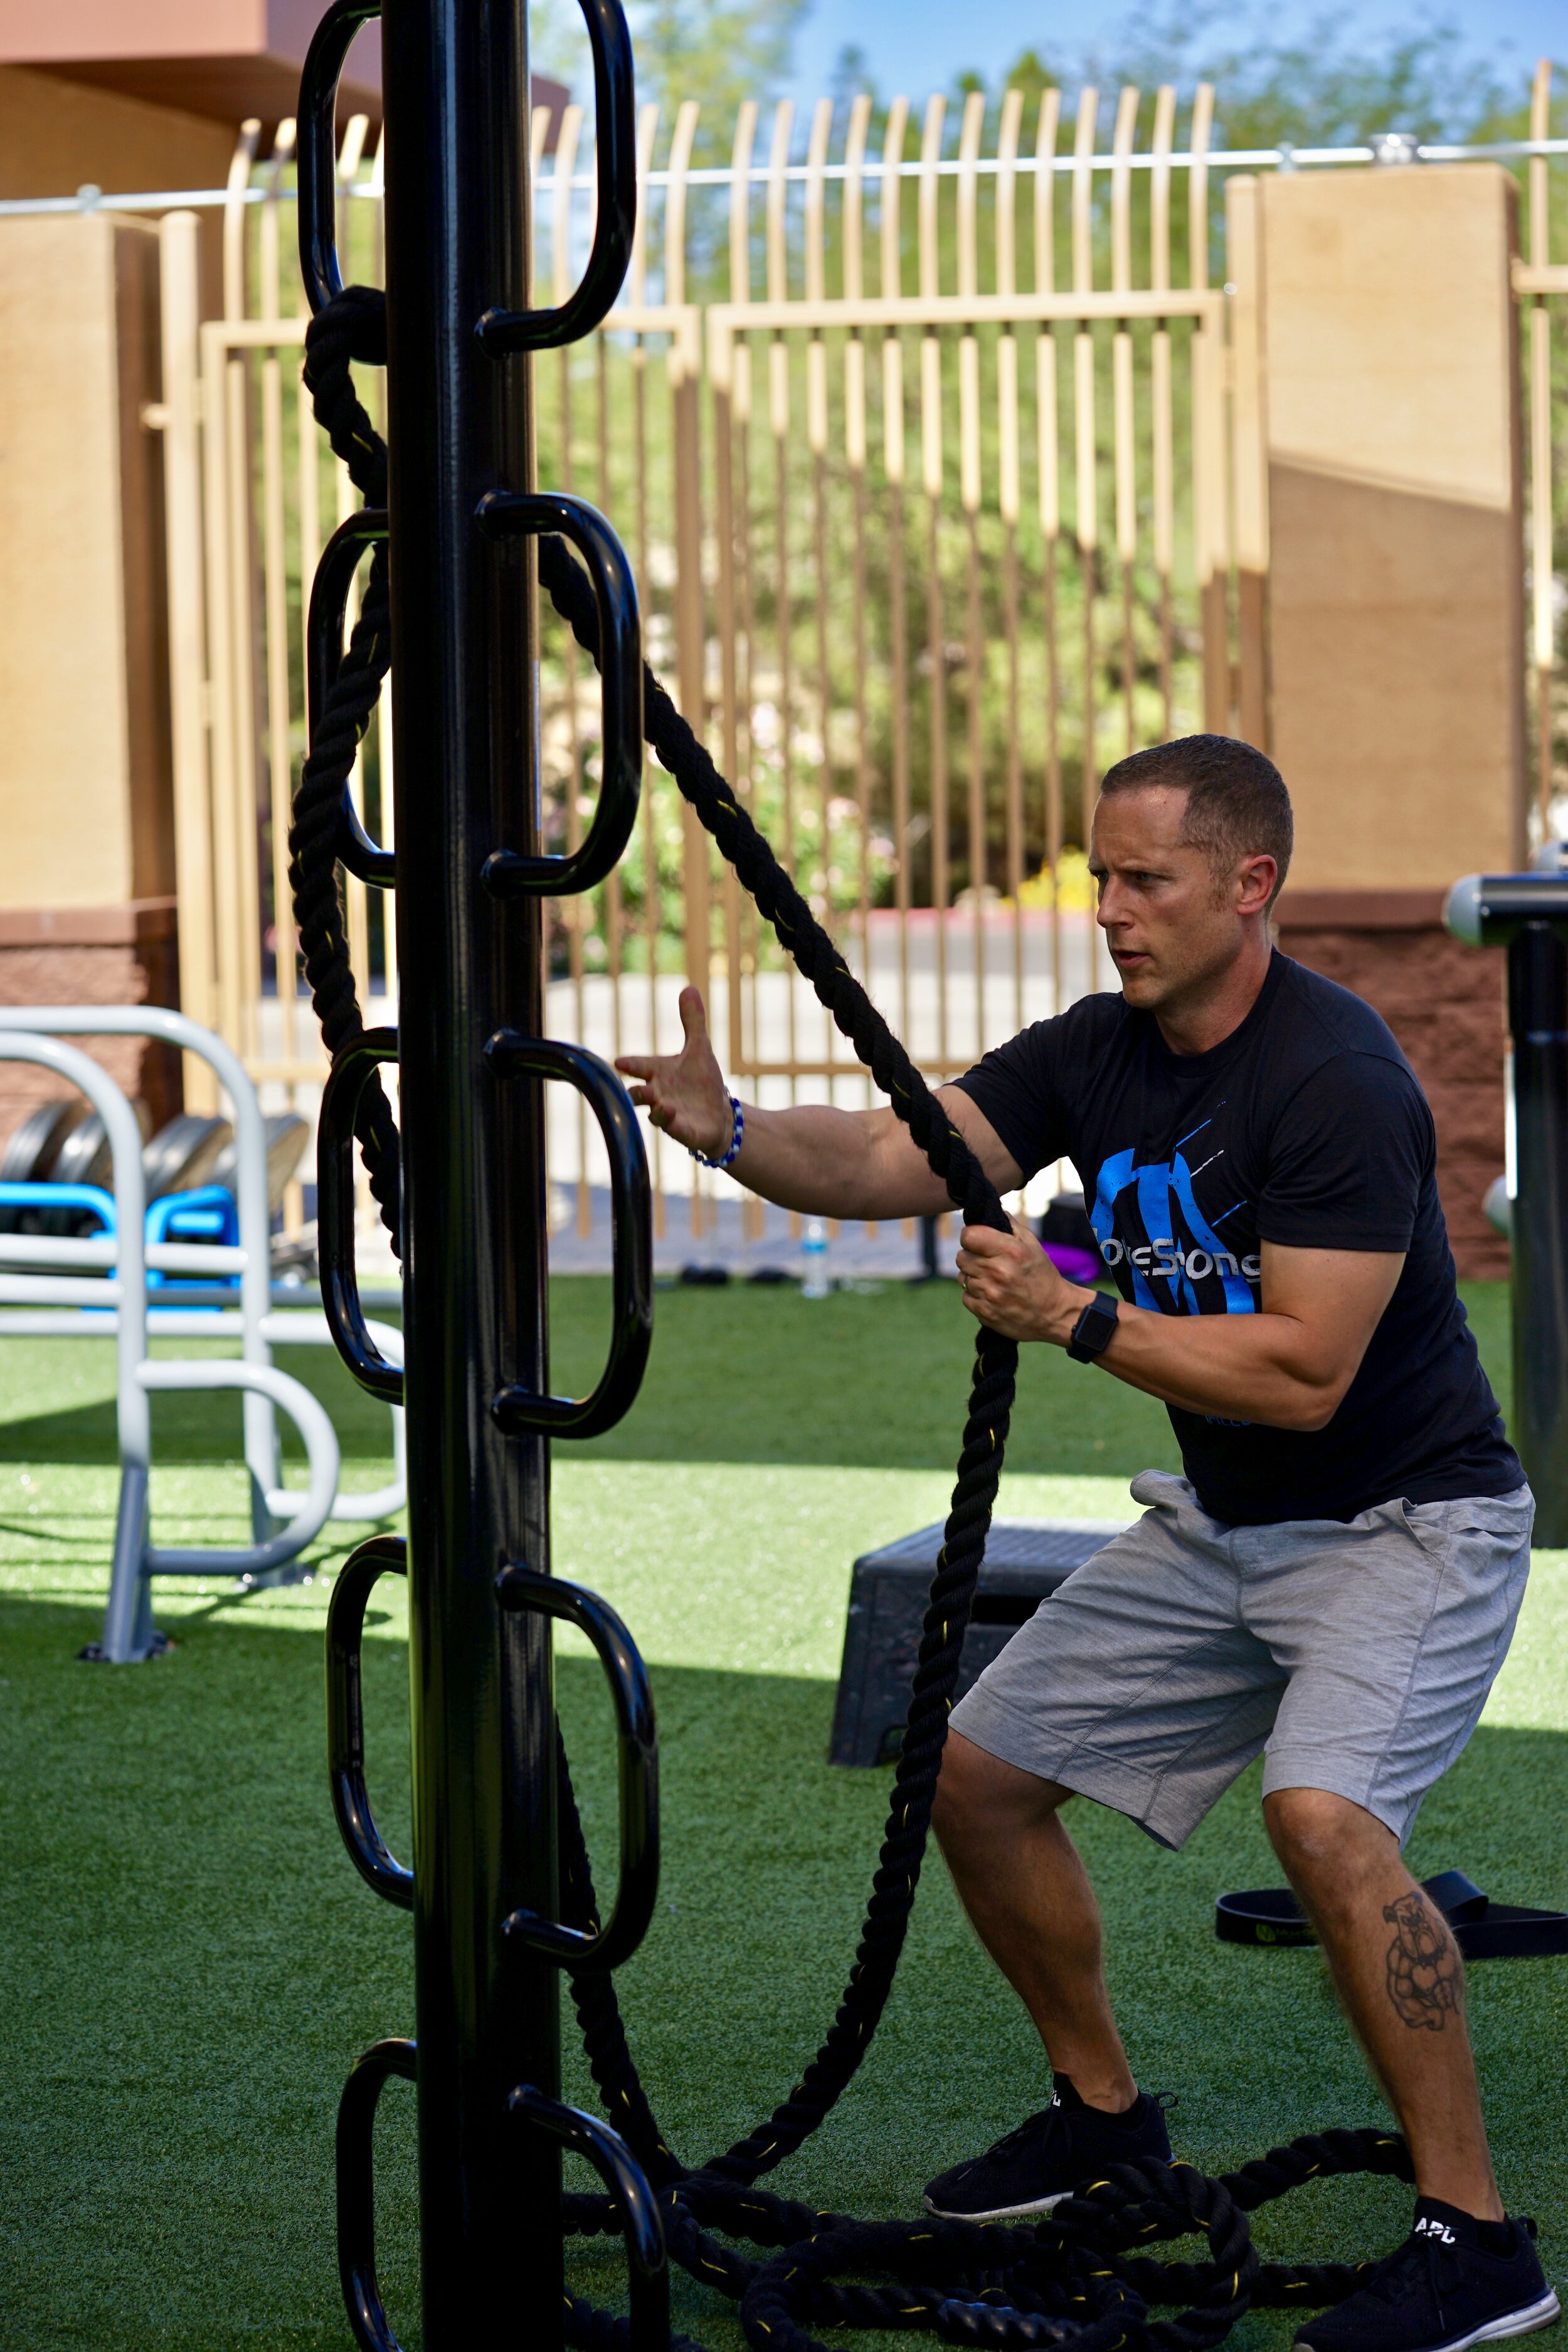 Battle Rope pull exercise outdoor gym